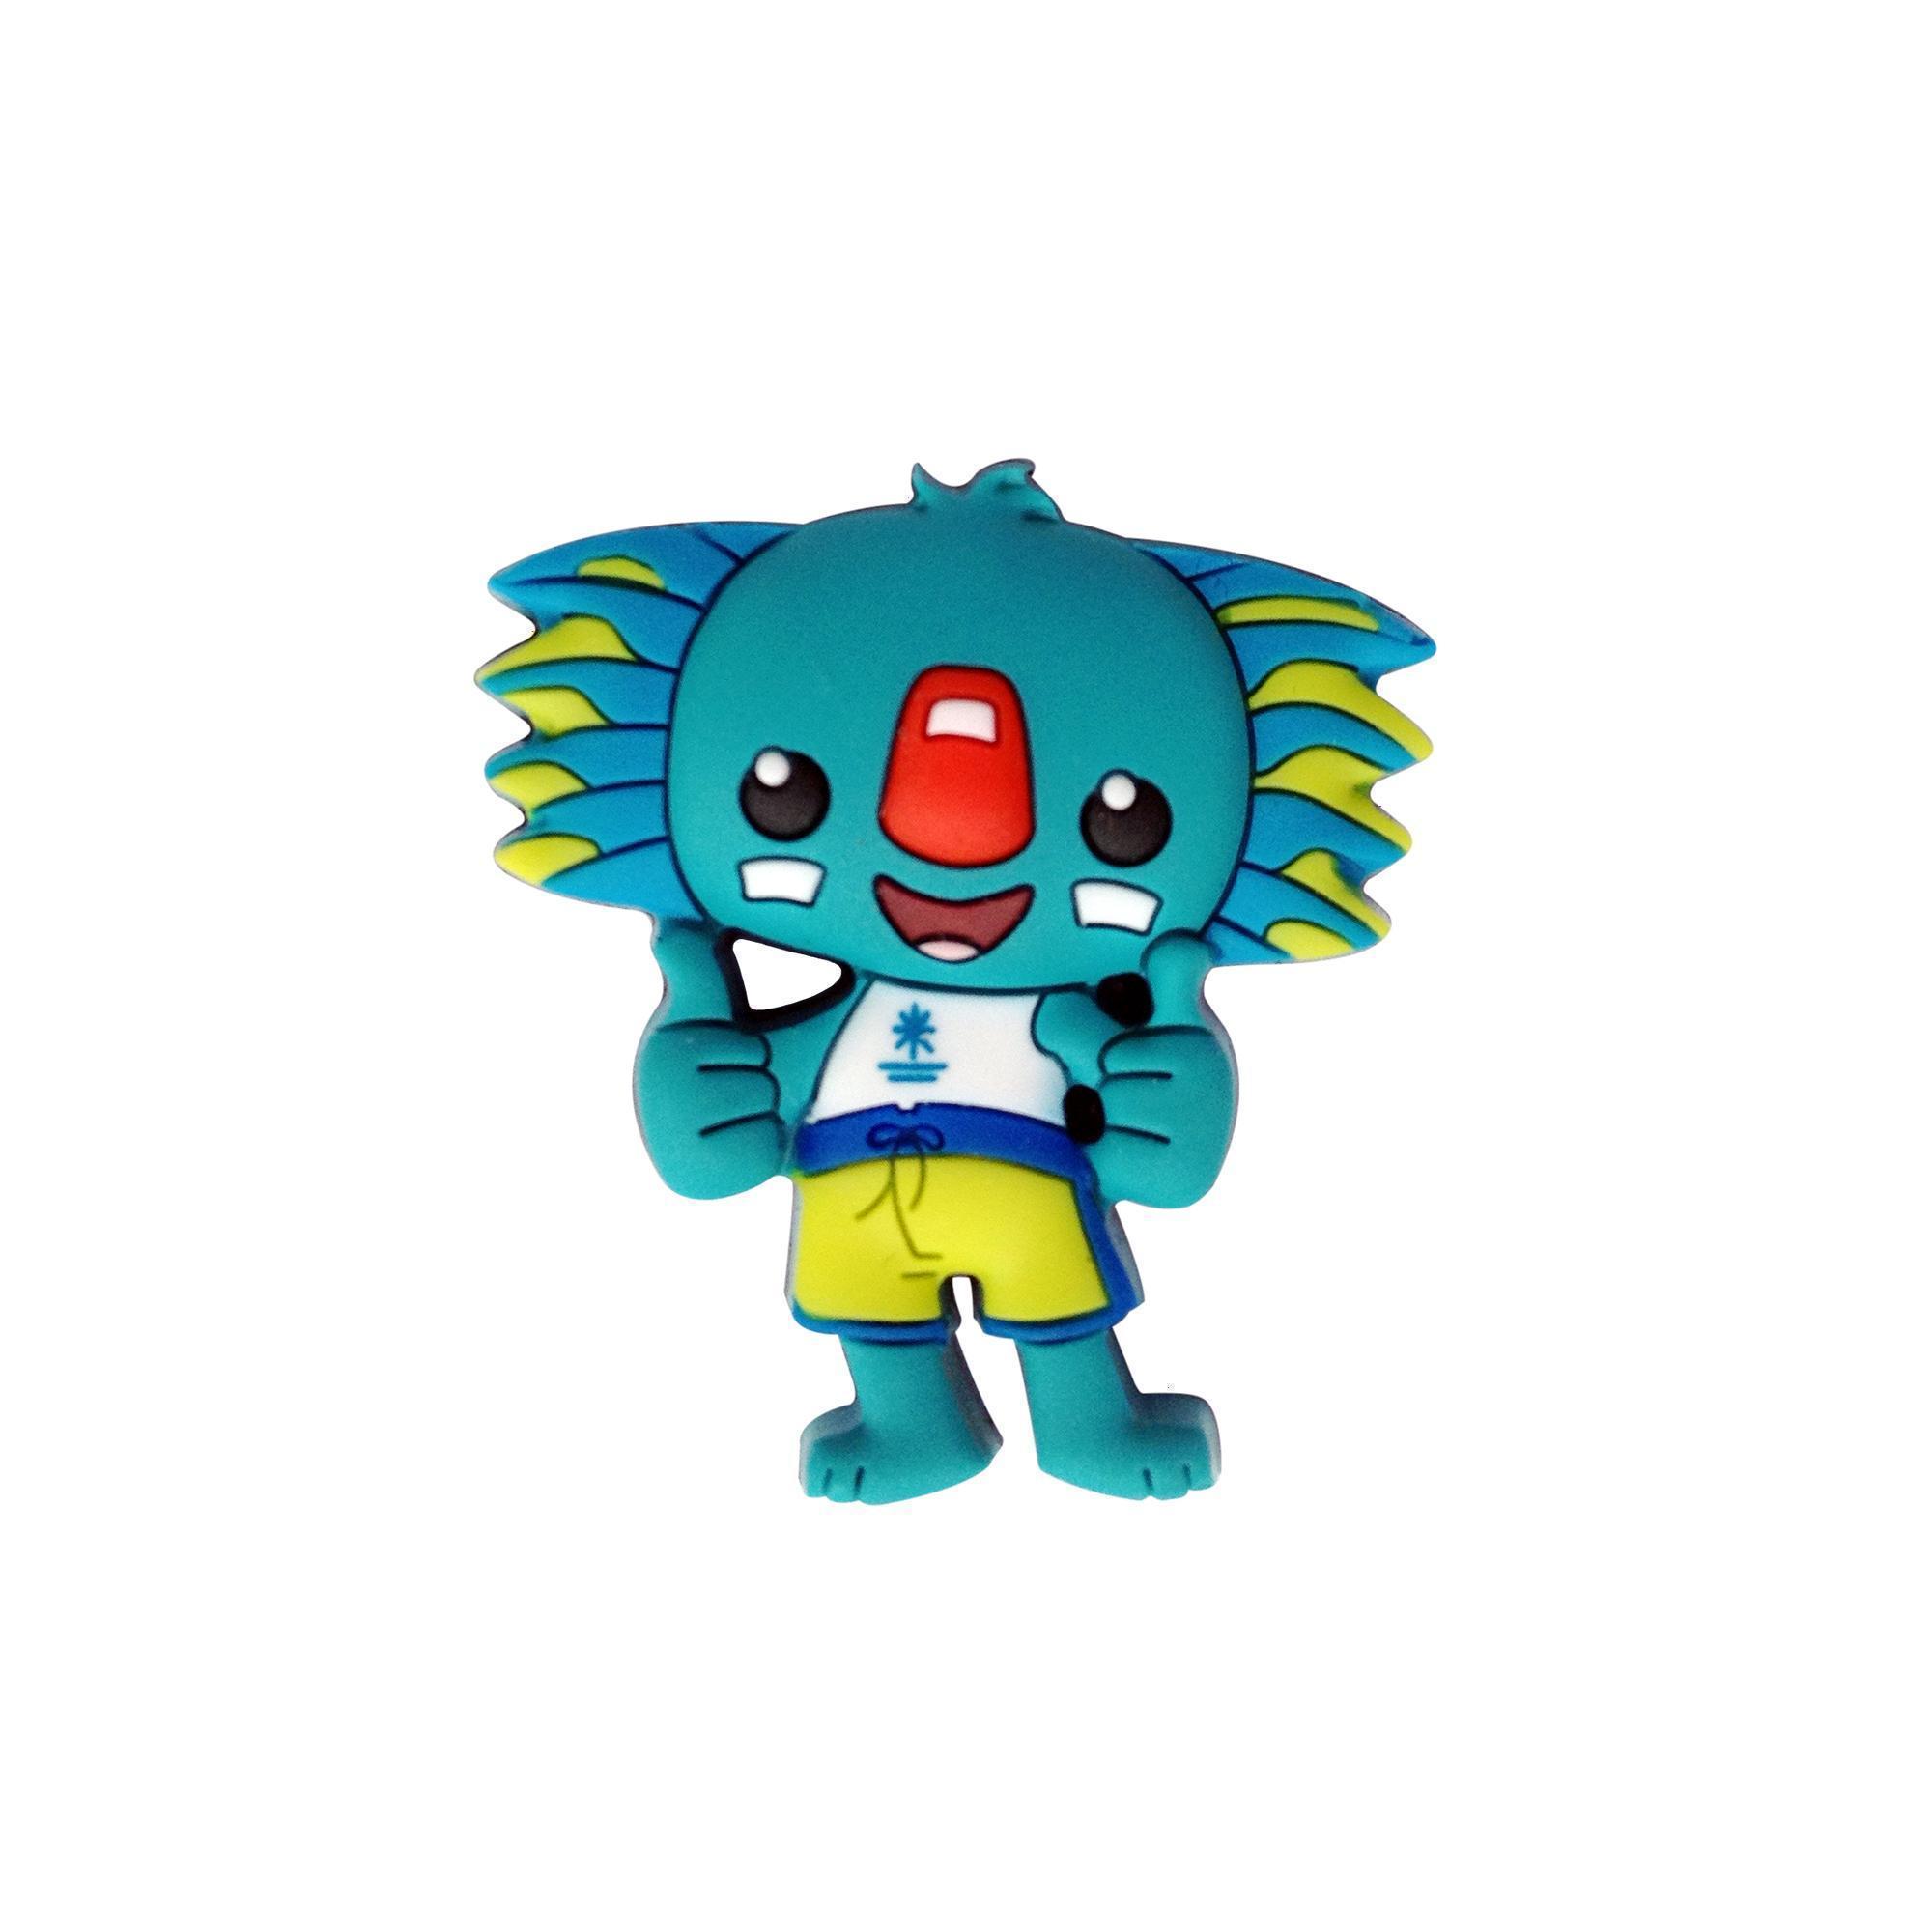 2018 Gold Coast Commonwealth Games Mascot "Borobi" Collectable Lapel Hat Tie Pin Badge